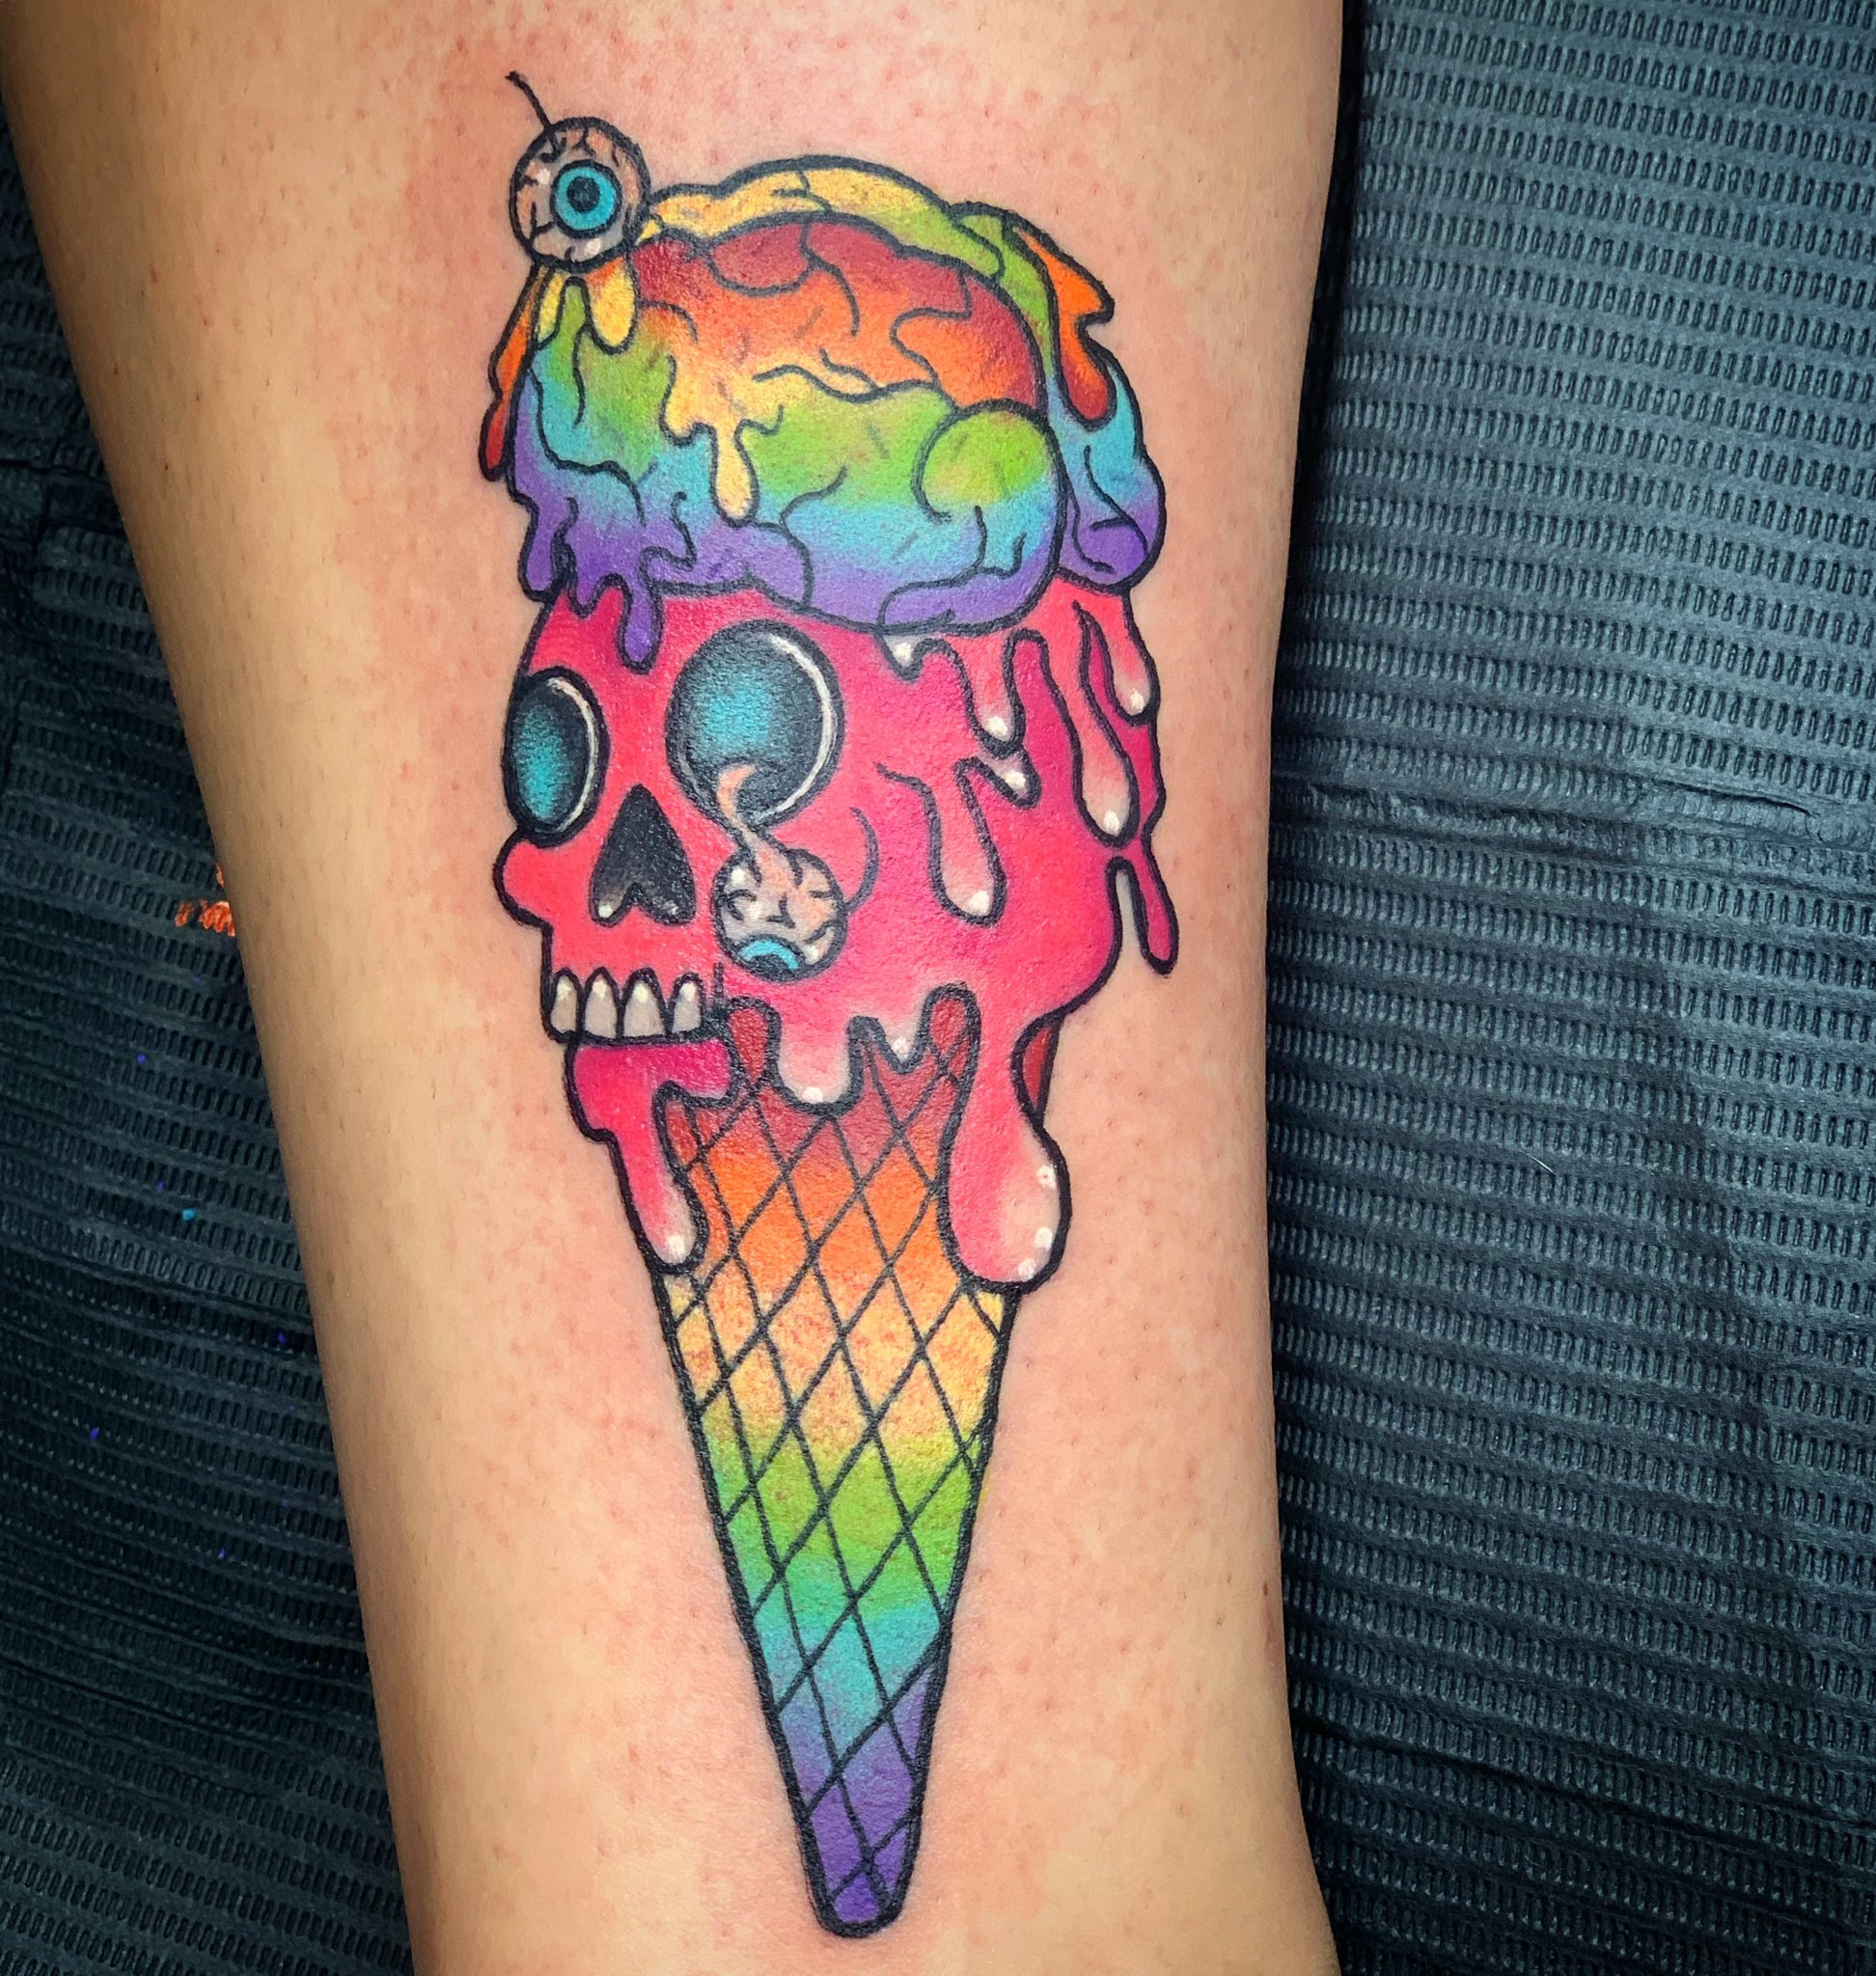 Delicious ice cream cone tattoo on the sternum - Tattoogrid.net